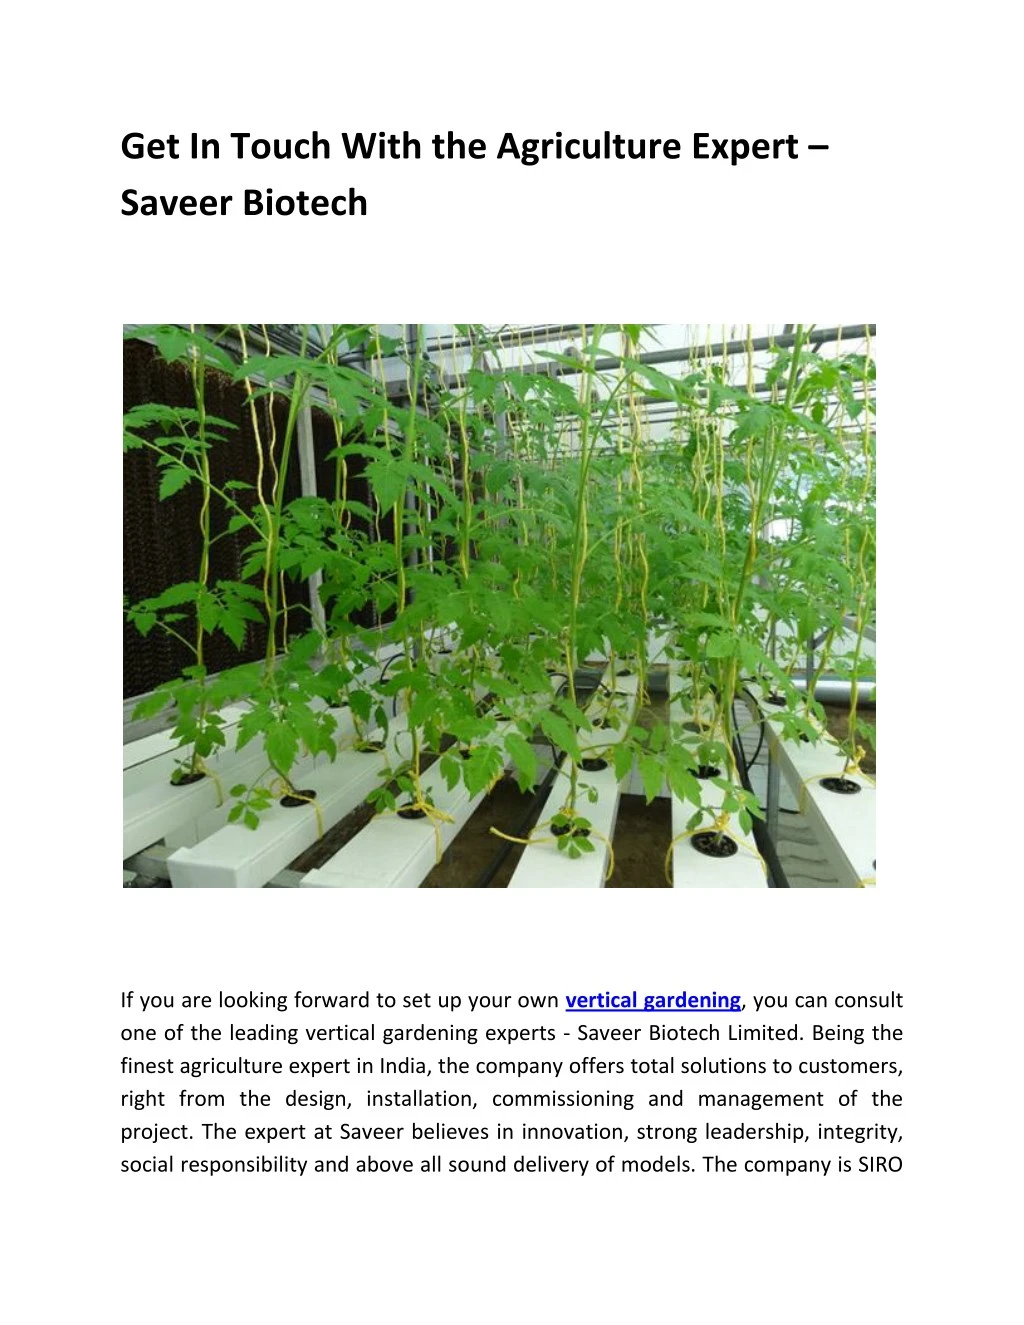 get in touch with the agriculture expert saveer